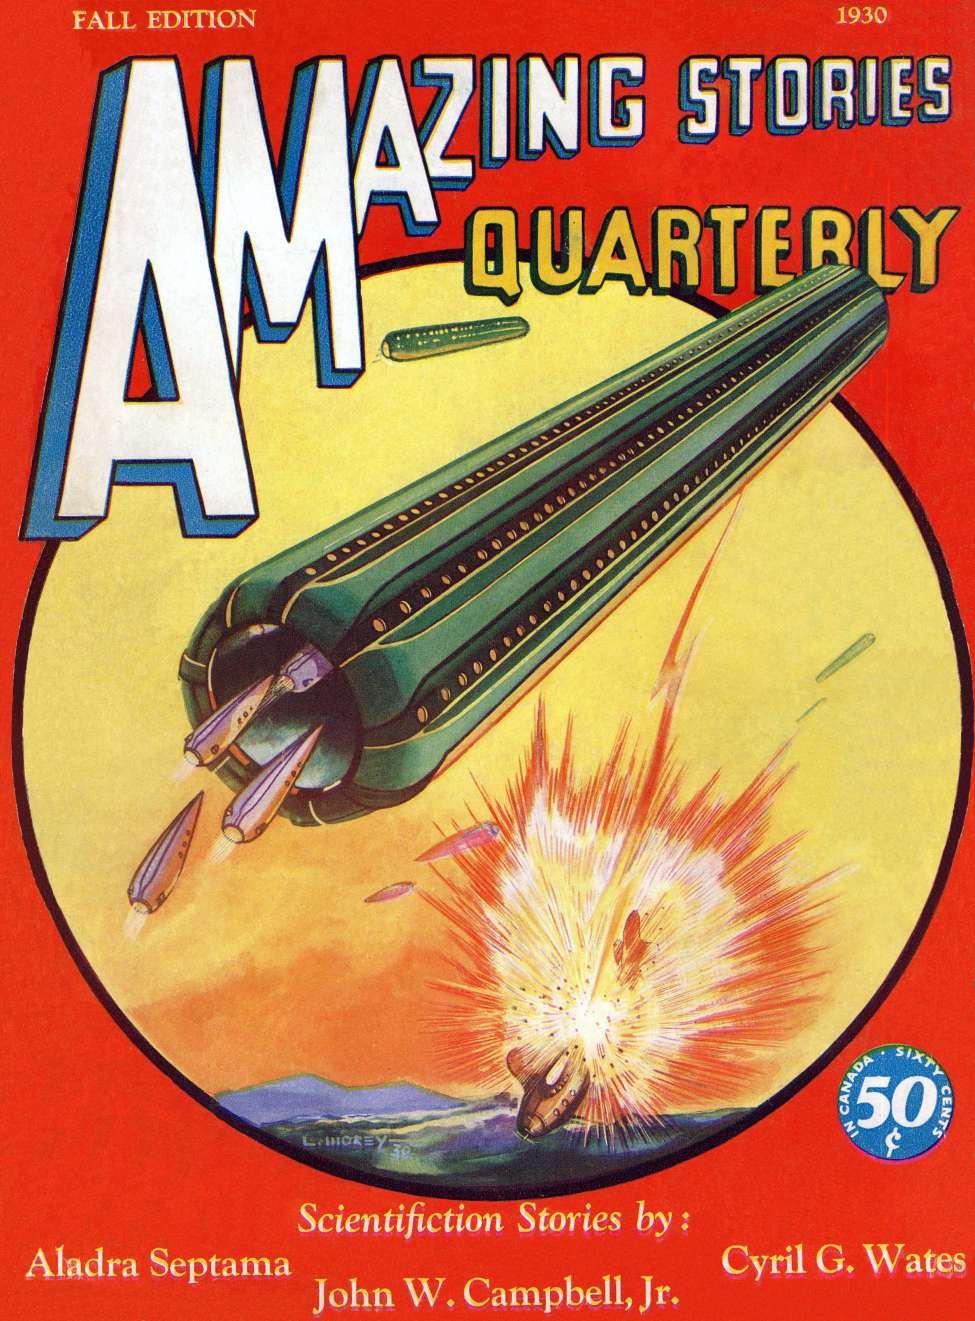 Book Cover For Amazing Stories Quarterly v3 4 - A Modern Prometheus - Cyril G. Wates